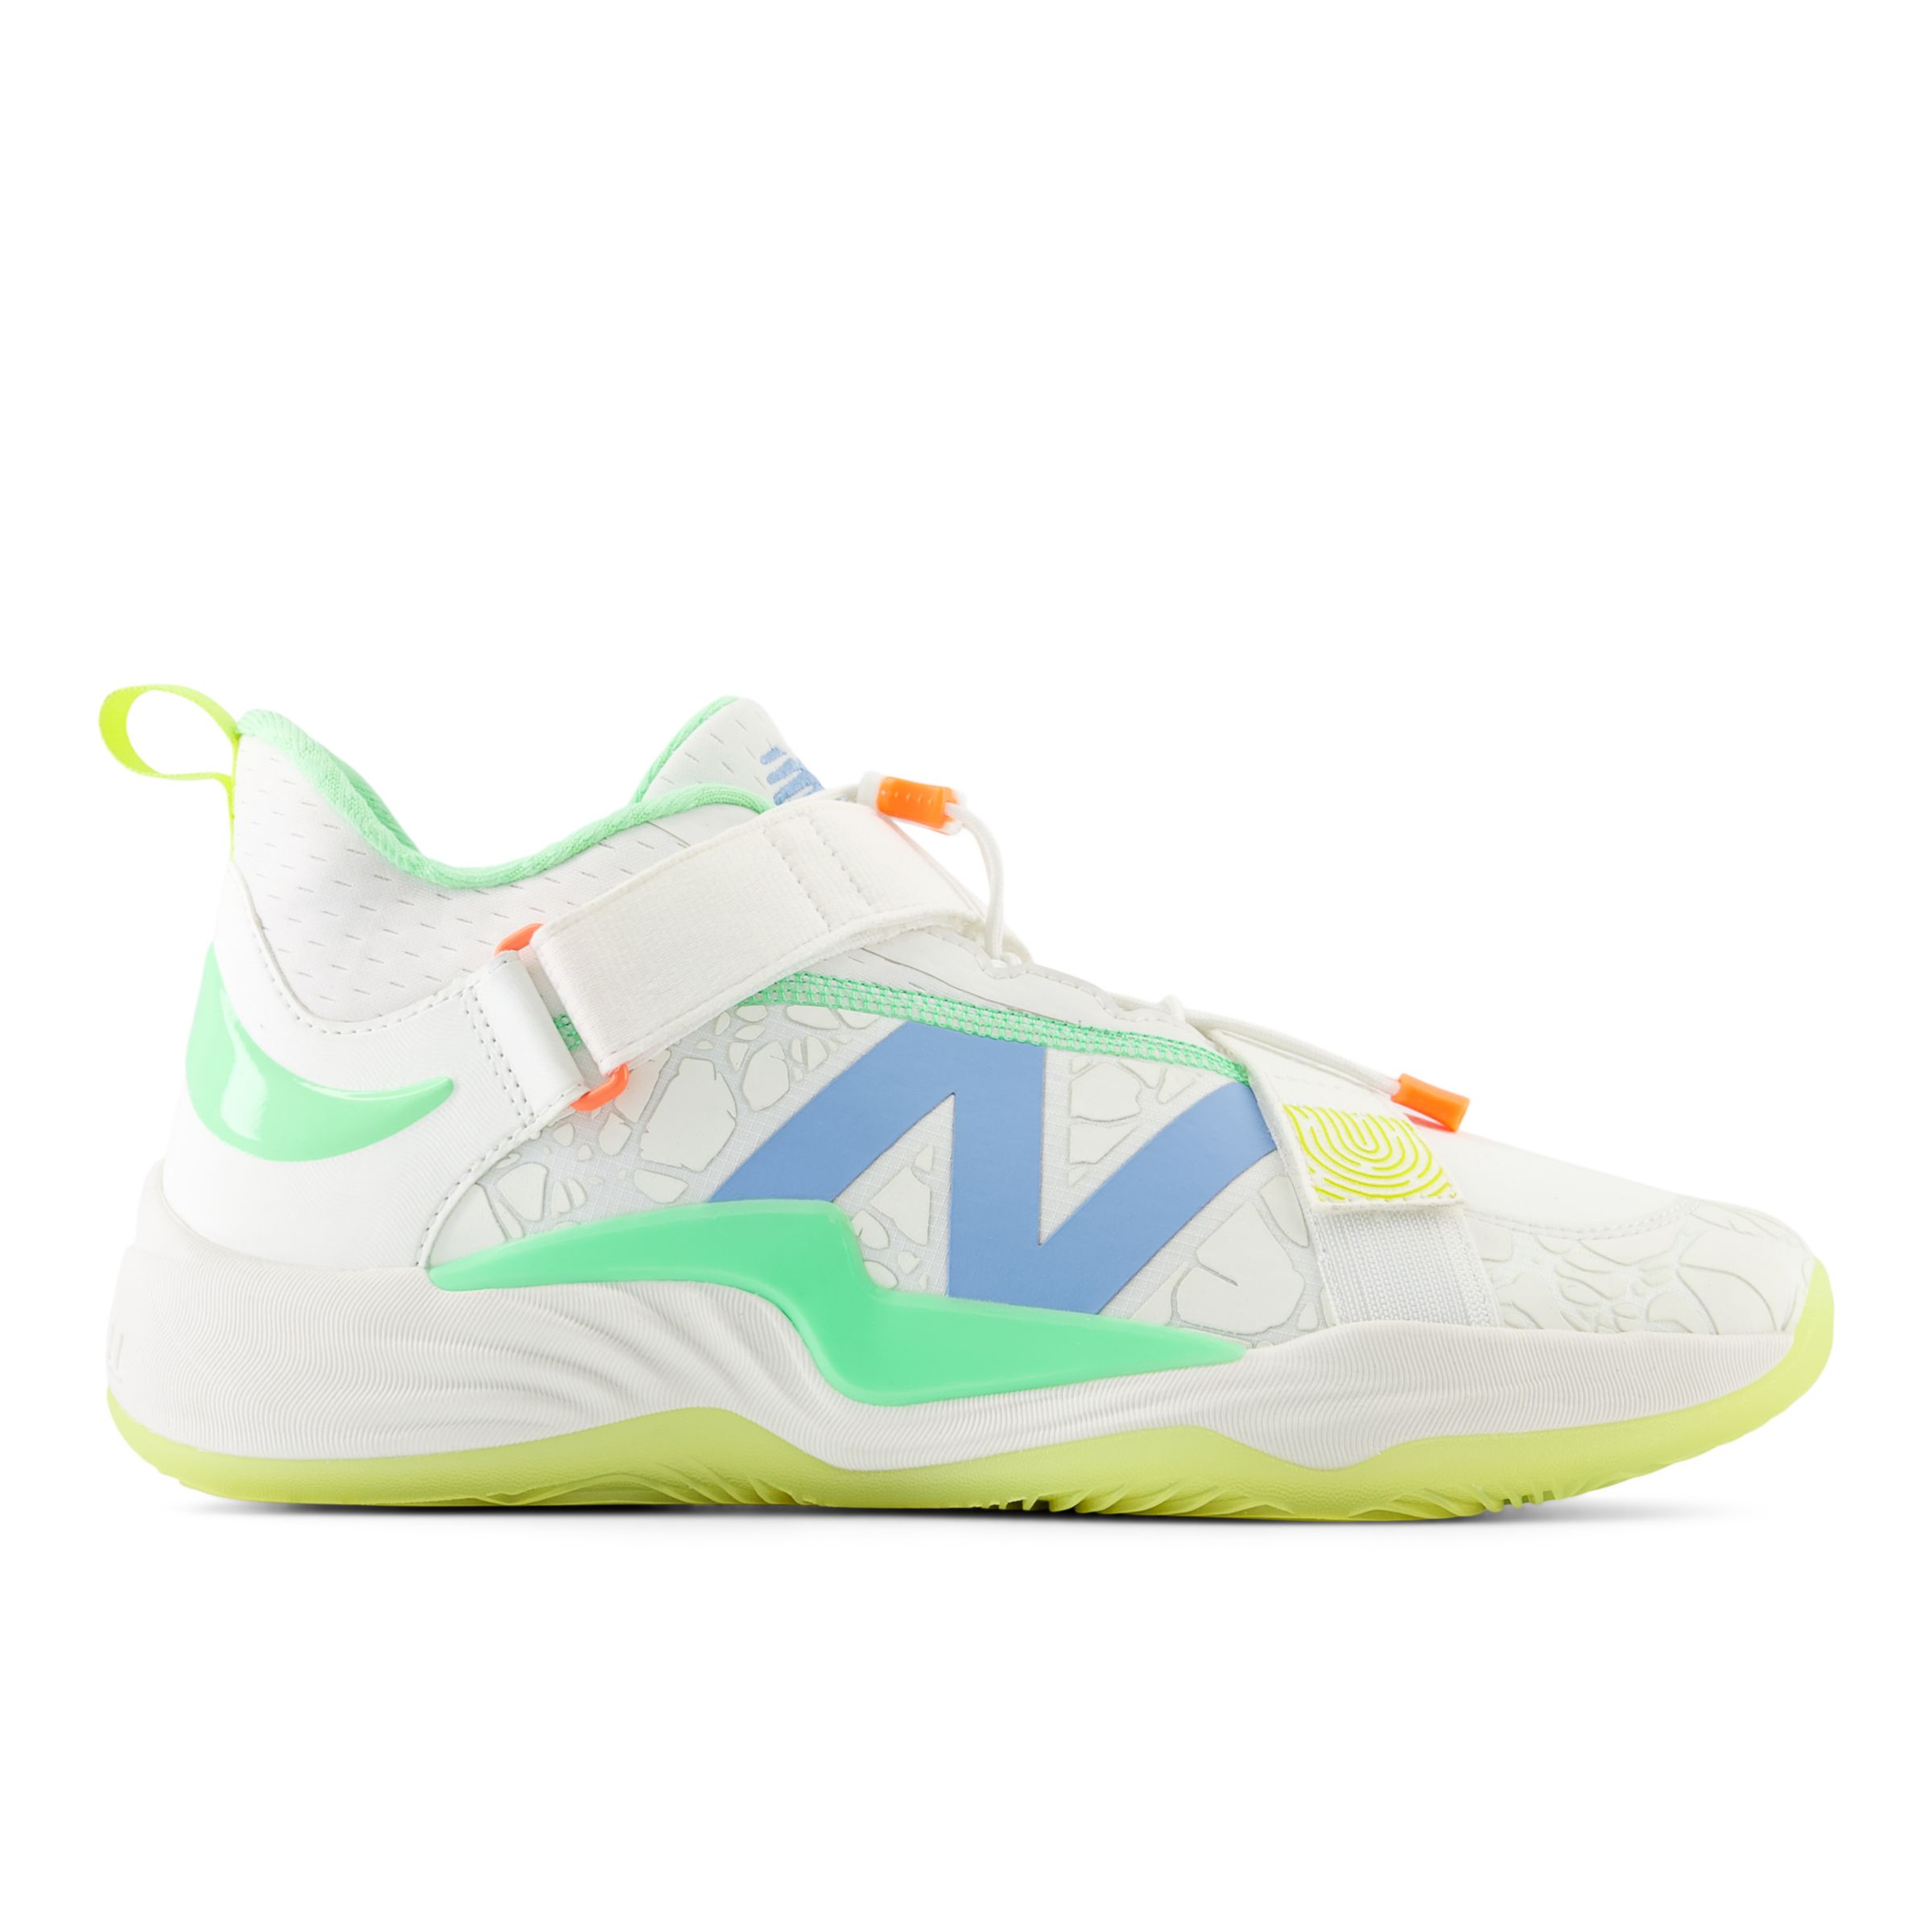 New Balance Unisex FuelCell Lindor 2 Comp - White/Orange/Green/Yellow (Size 10.5)